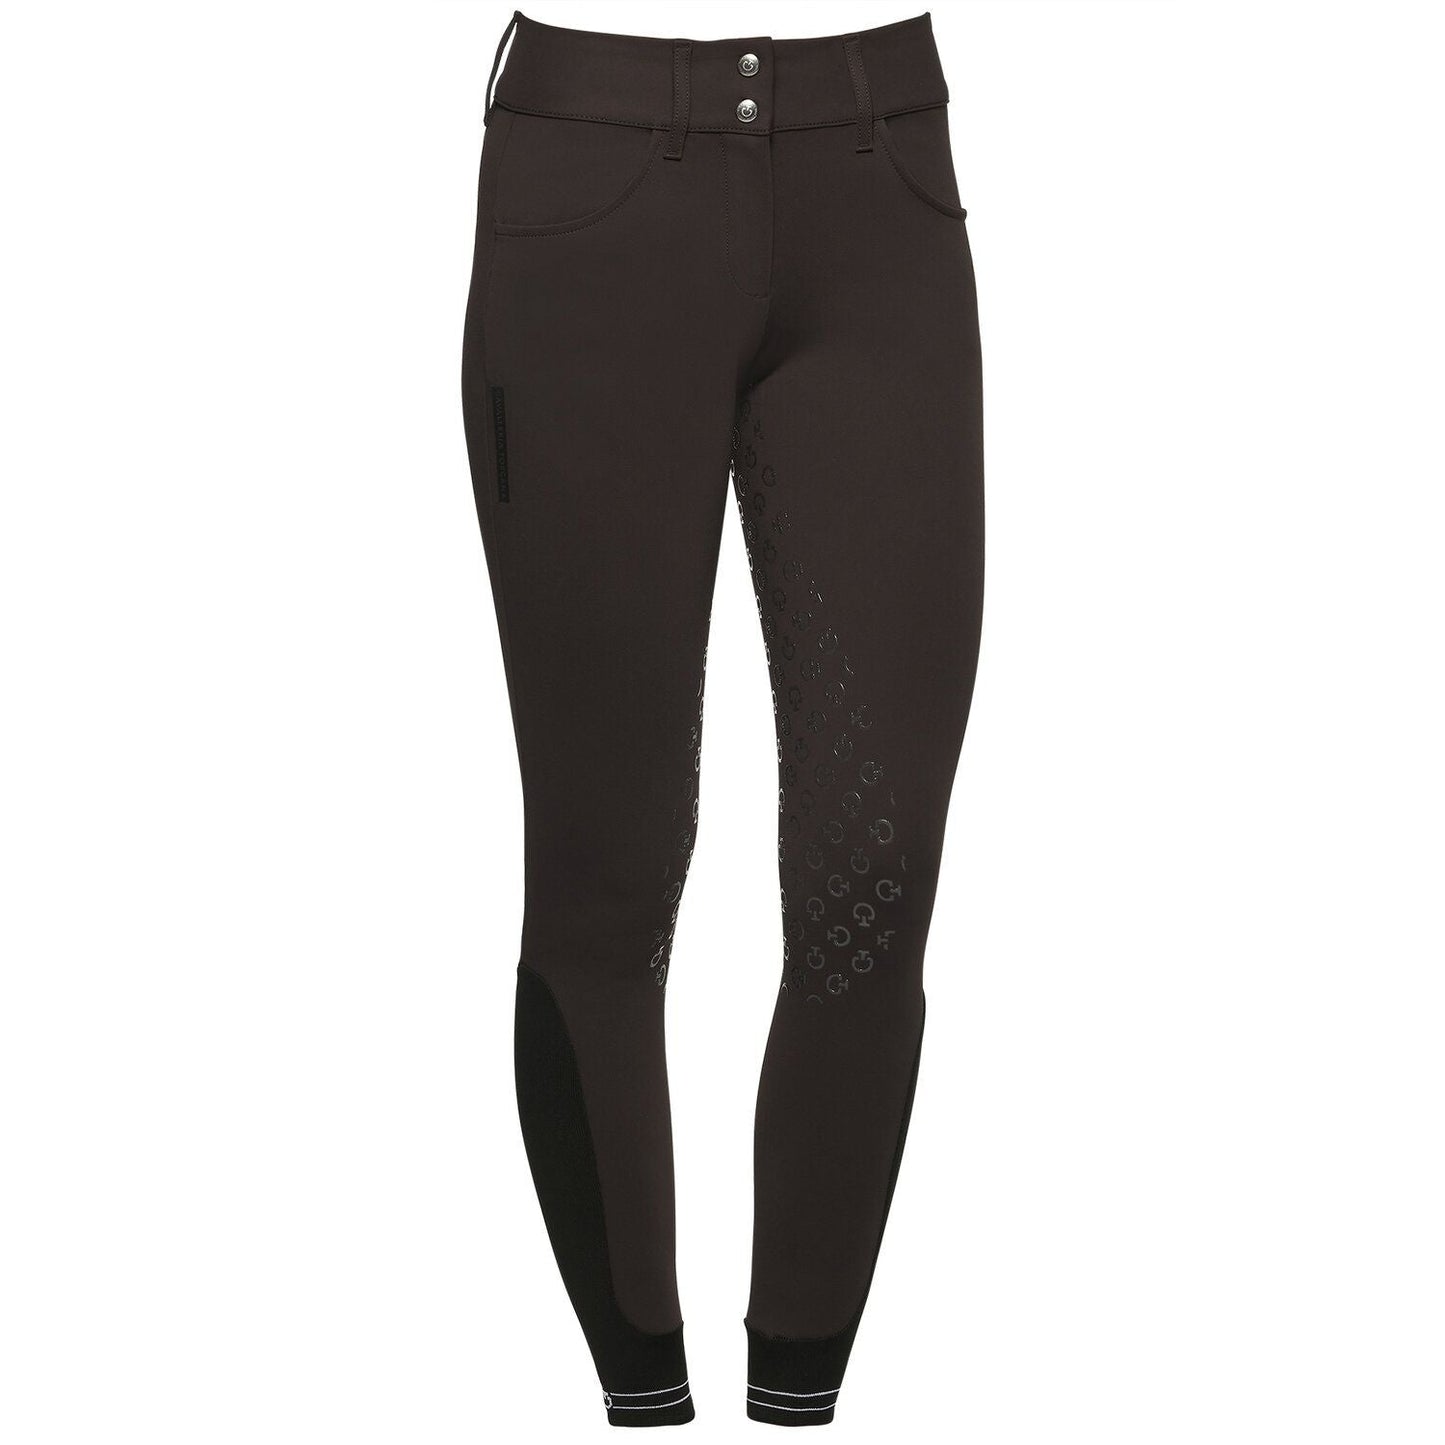 American Full Grip Breeches - Piquet - Chocolate-Trailrace Equestrian Outfitters-The Equestrian